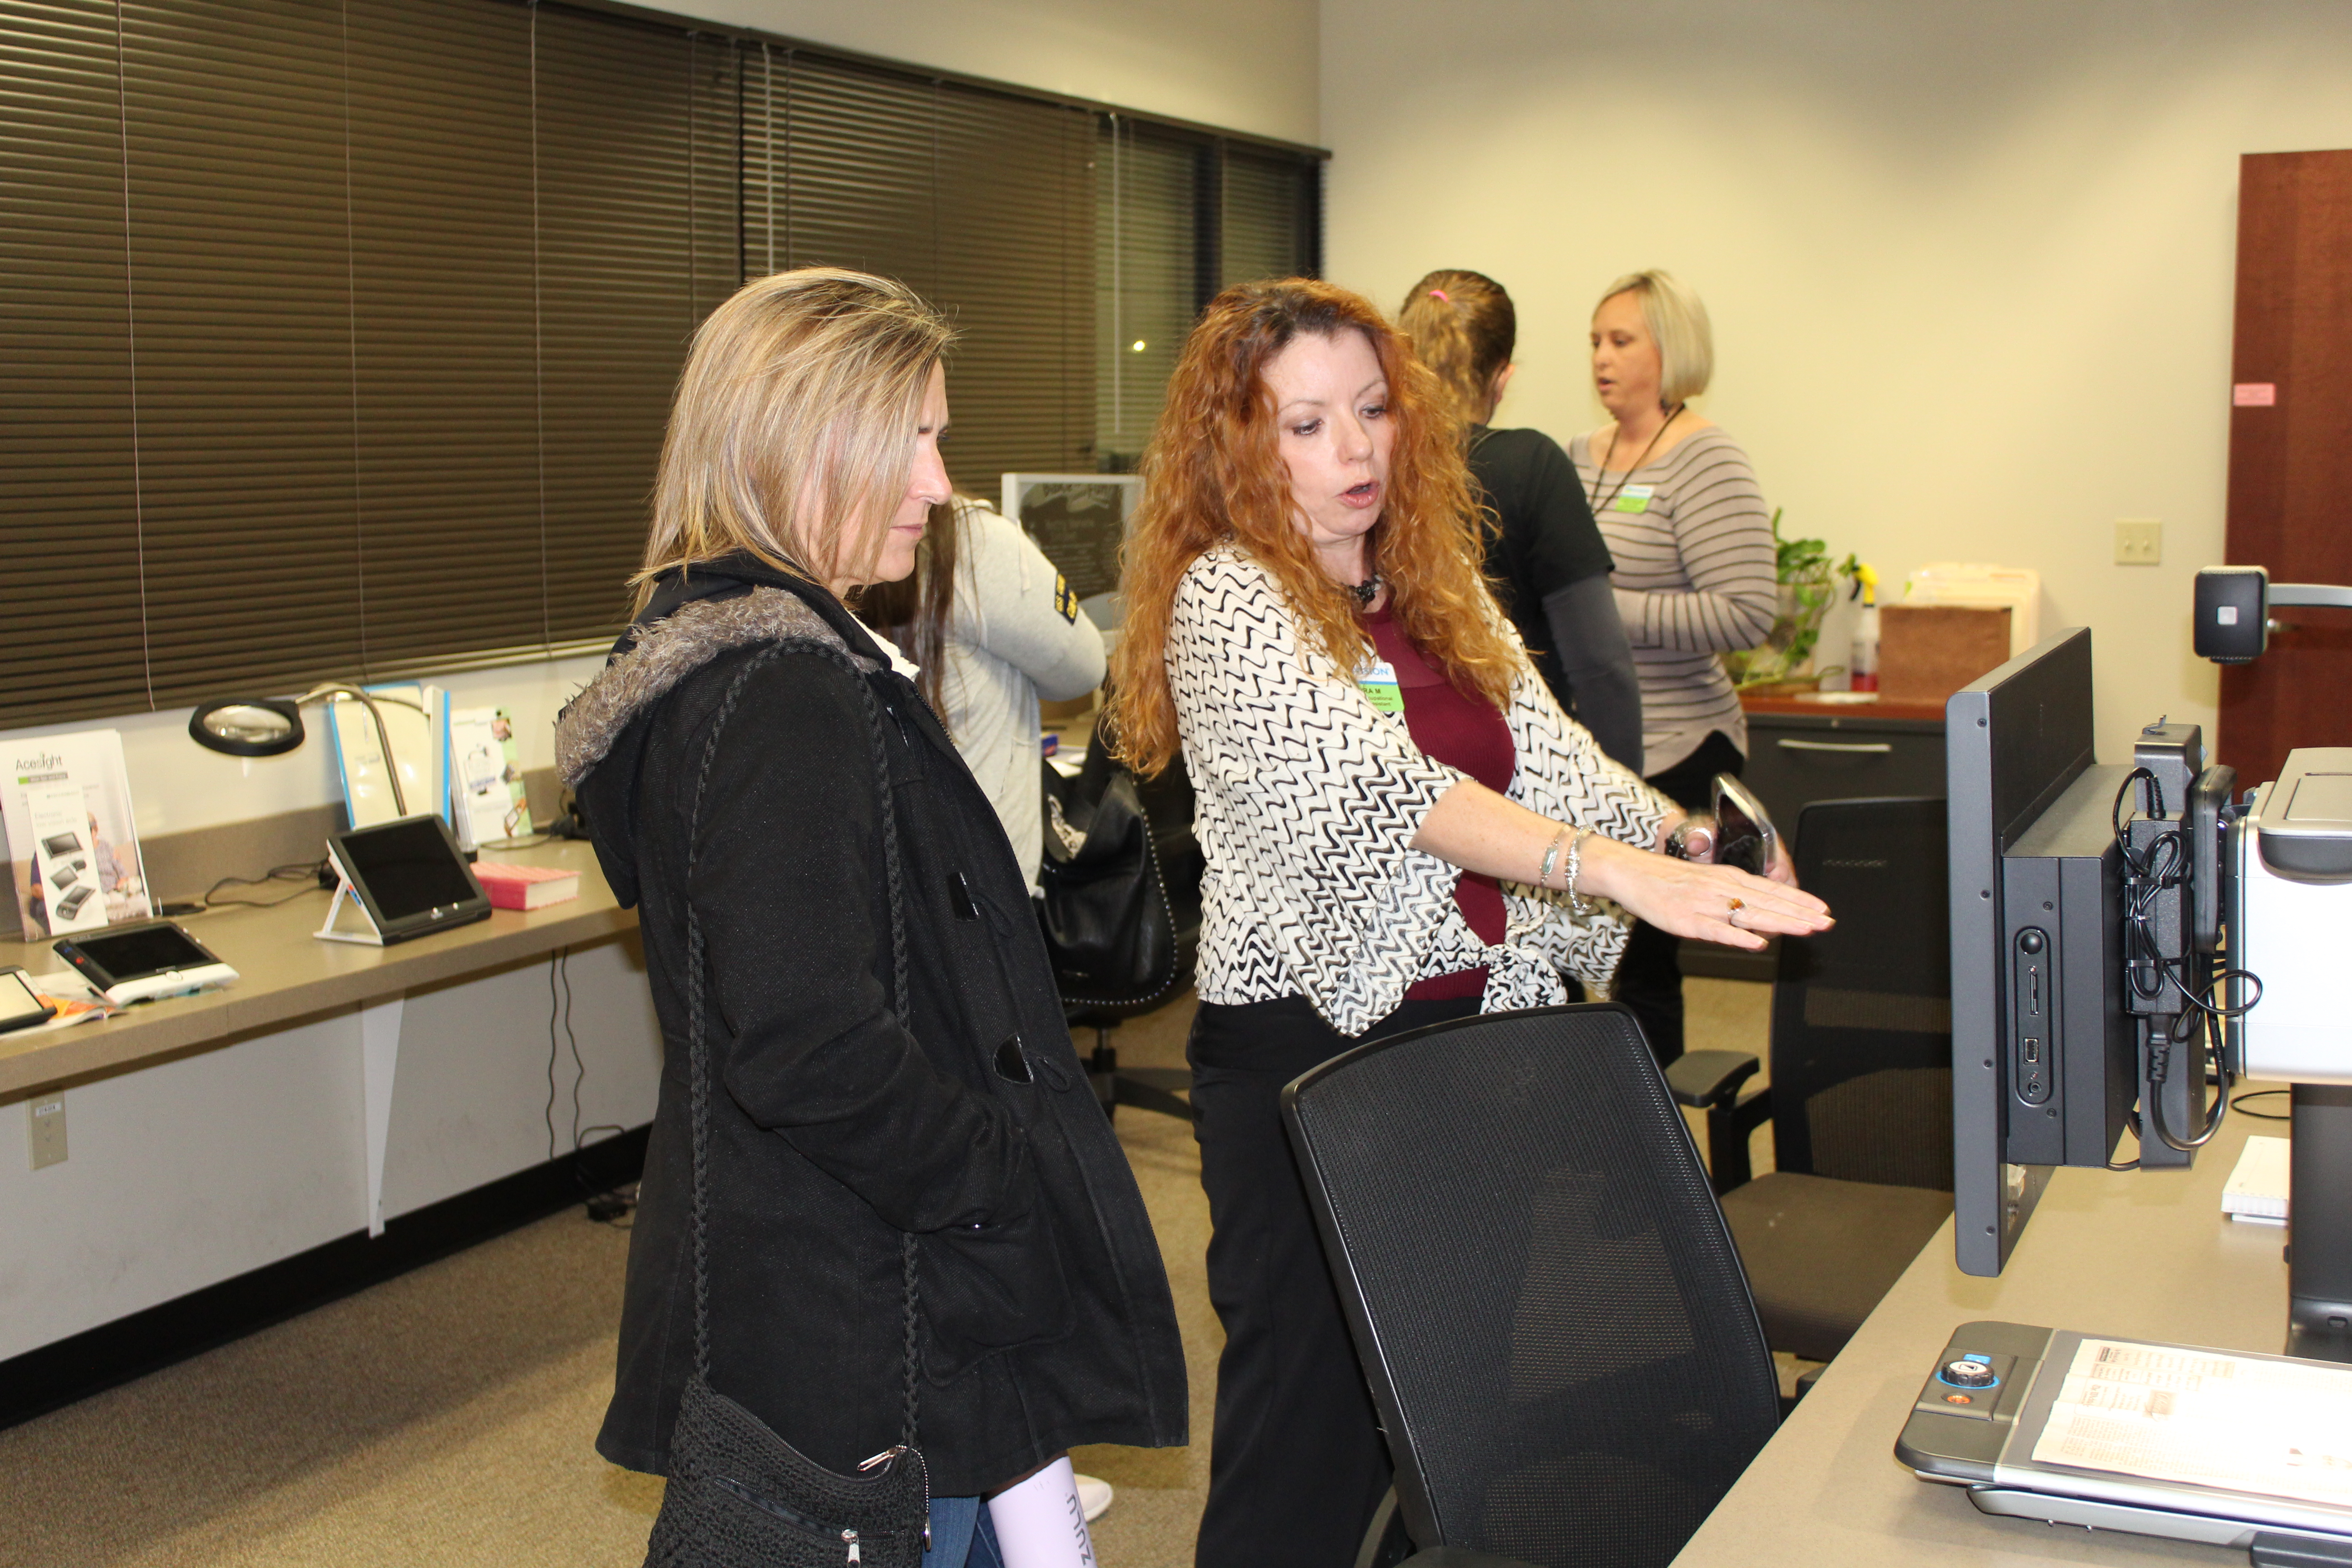 OT assistant explains one of the assistive devices at the EVRC open house